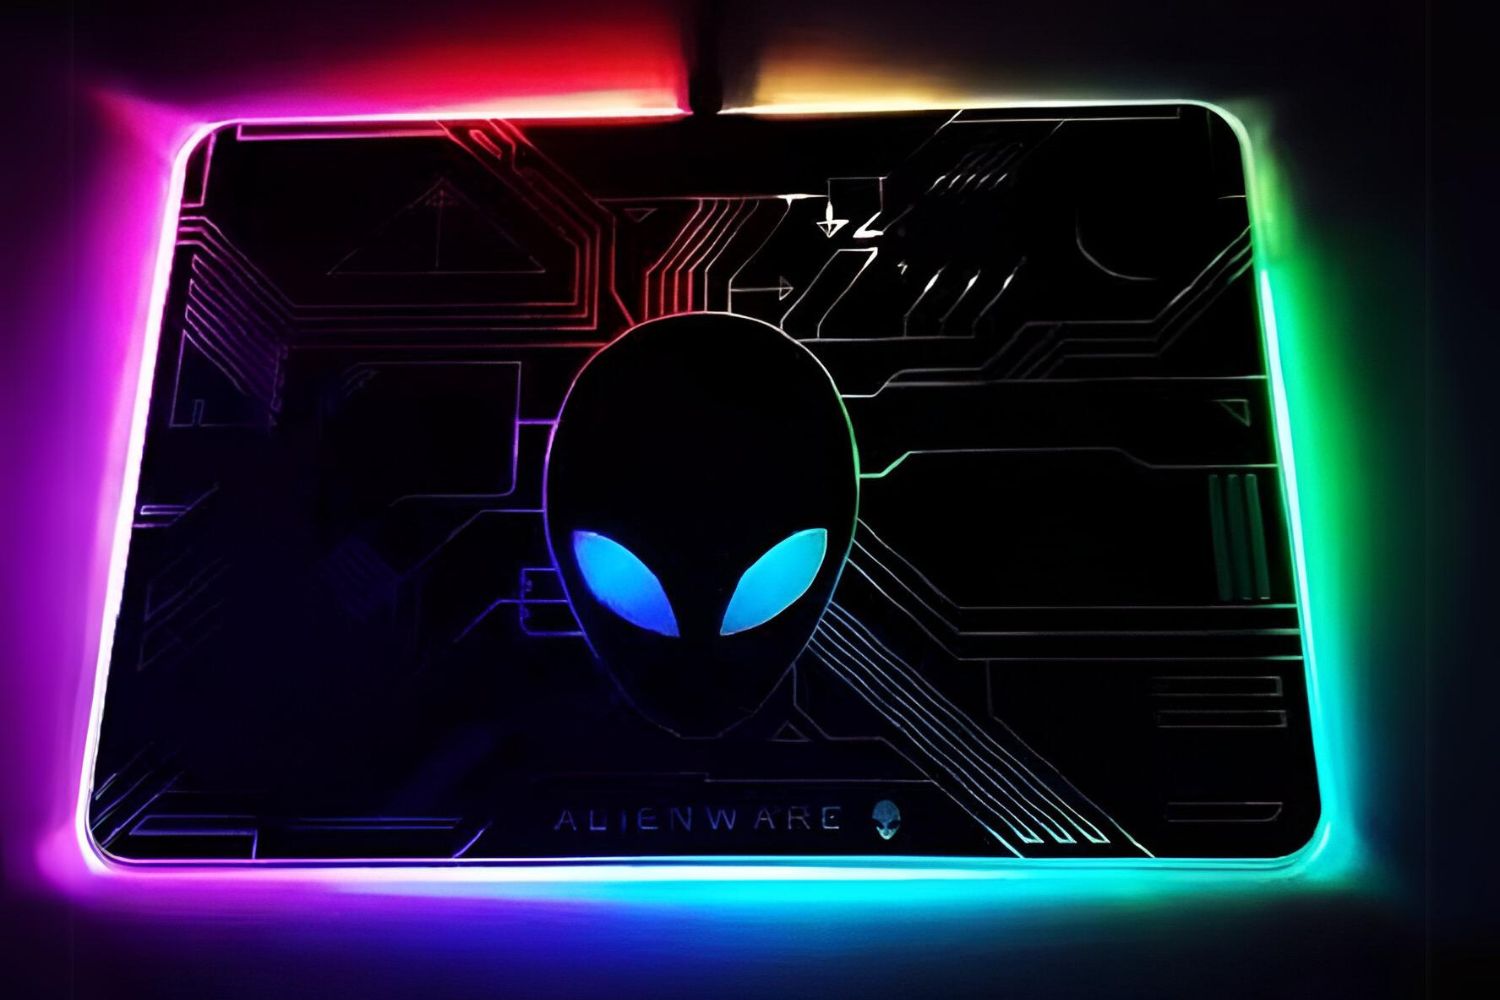 Alienware: What Makes The Mouse Pad Light Up